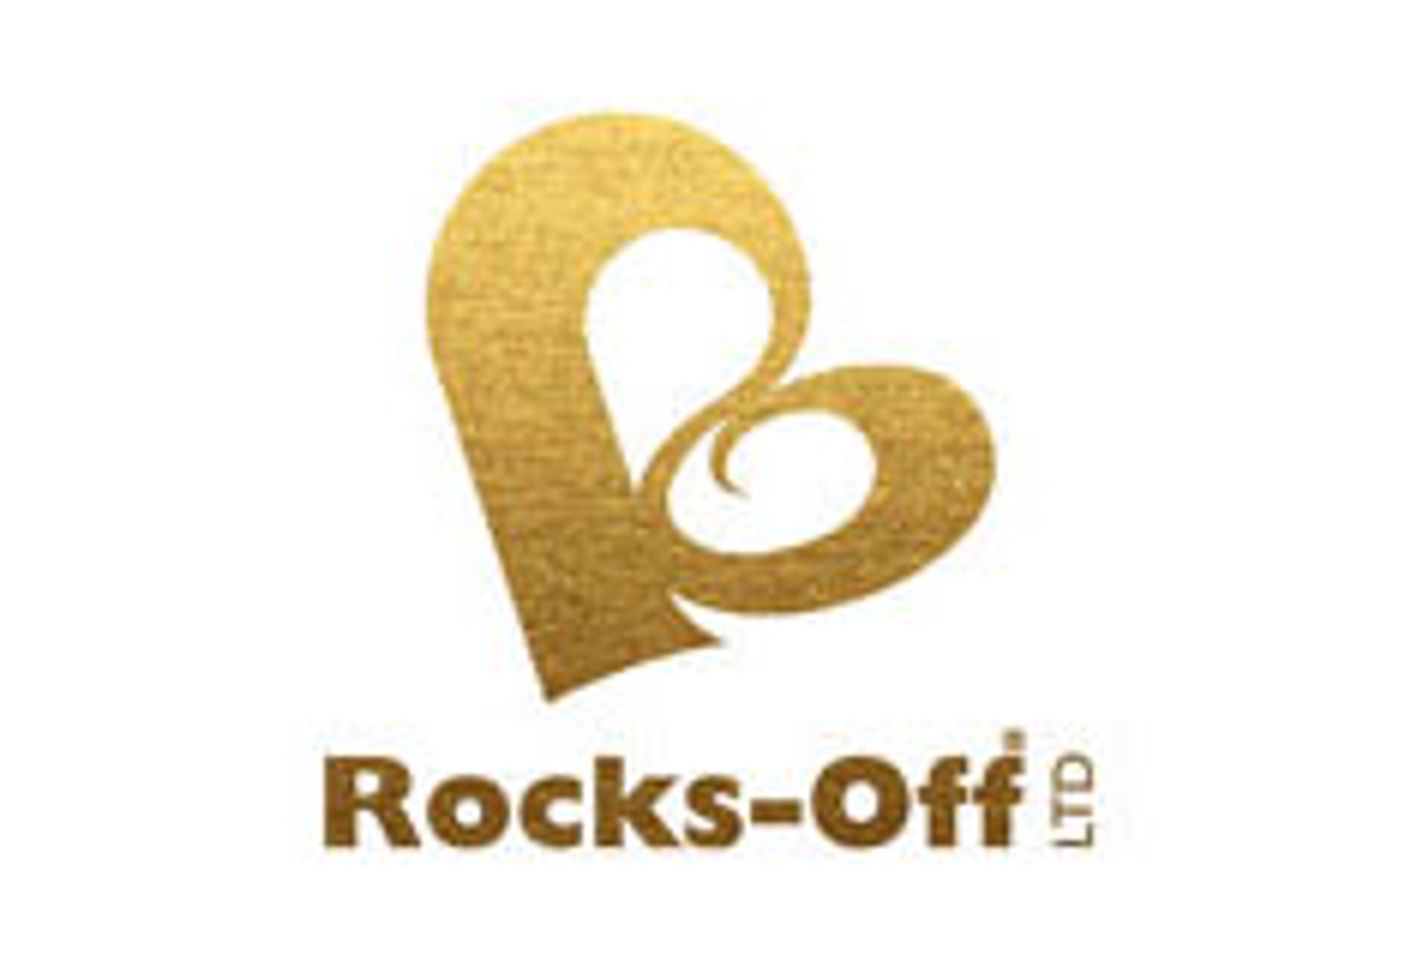 Rocks-Off’s Feranti Wins ‘Best Couples Product’ at the Adultex Awards